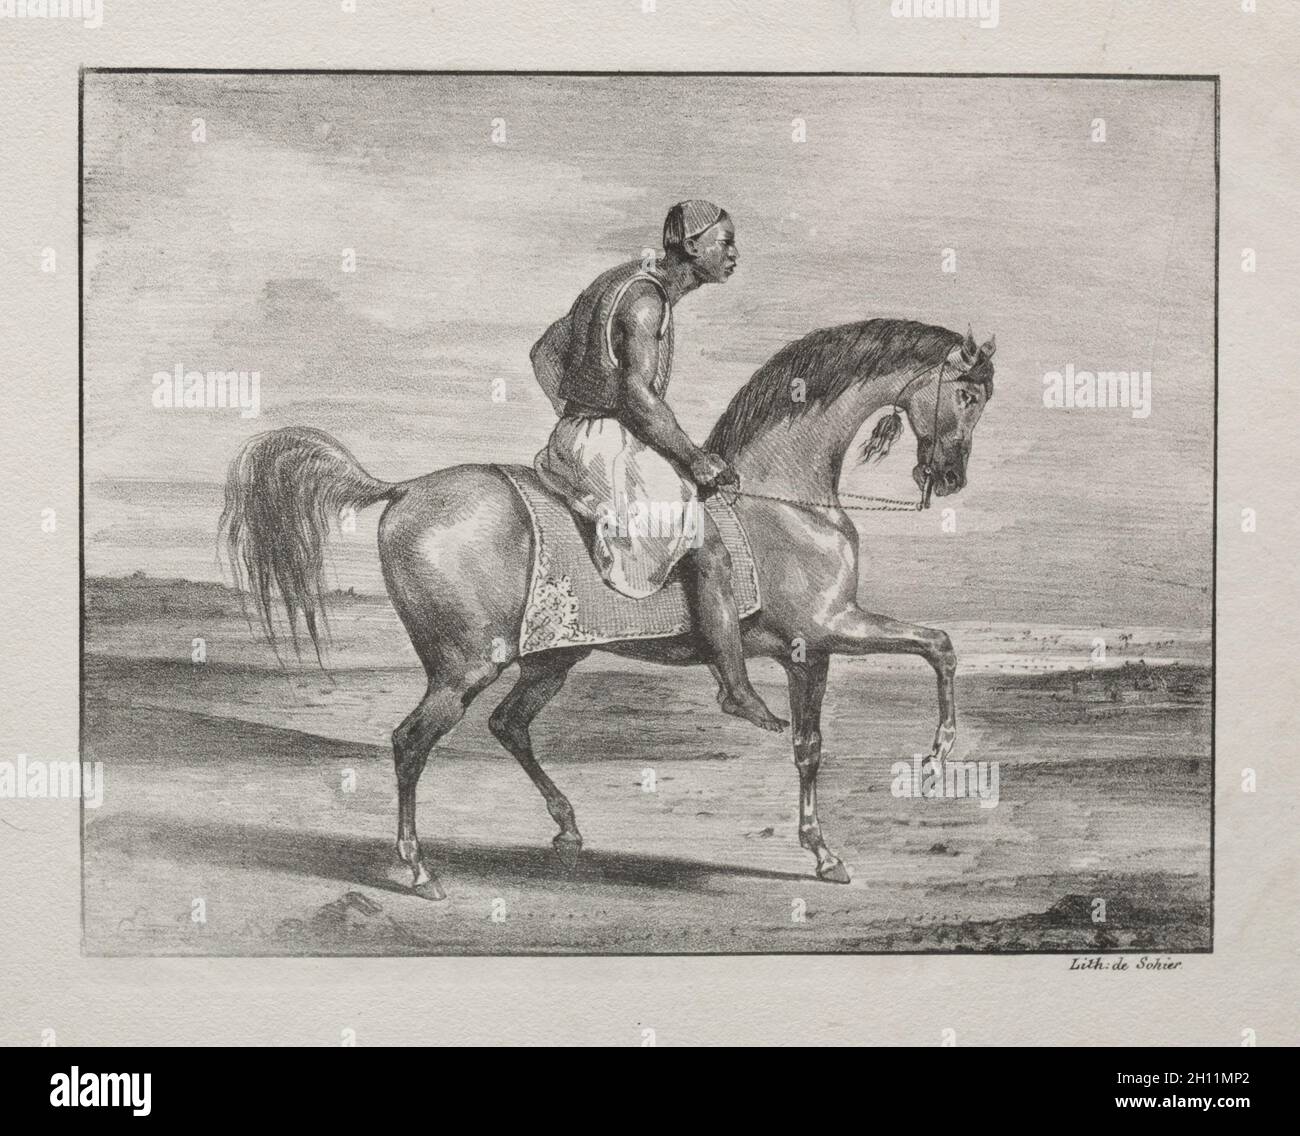 African on Horseback, 1823. Eugène Delacroix (French, 1798-1863). Lithograph; sheet: 25.5 x 29.1 cm (10 1/16 x 11 7/16 in.); image: 16.4 x 21.1 cm (6 7/16 x 8 5/16 in.). Stock Photo